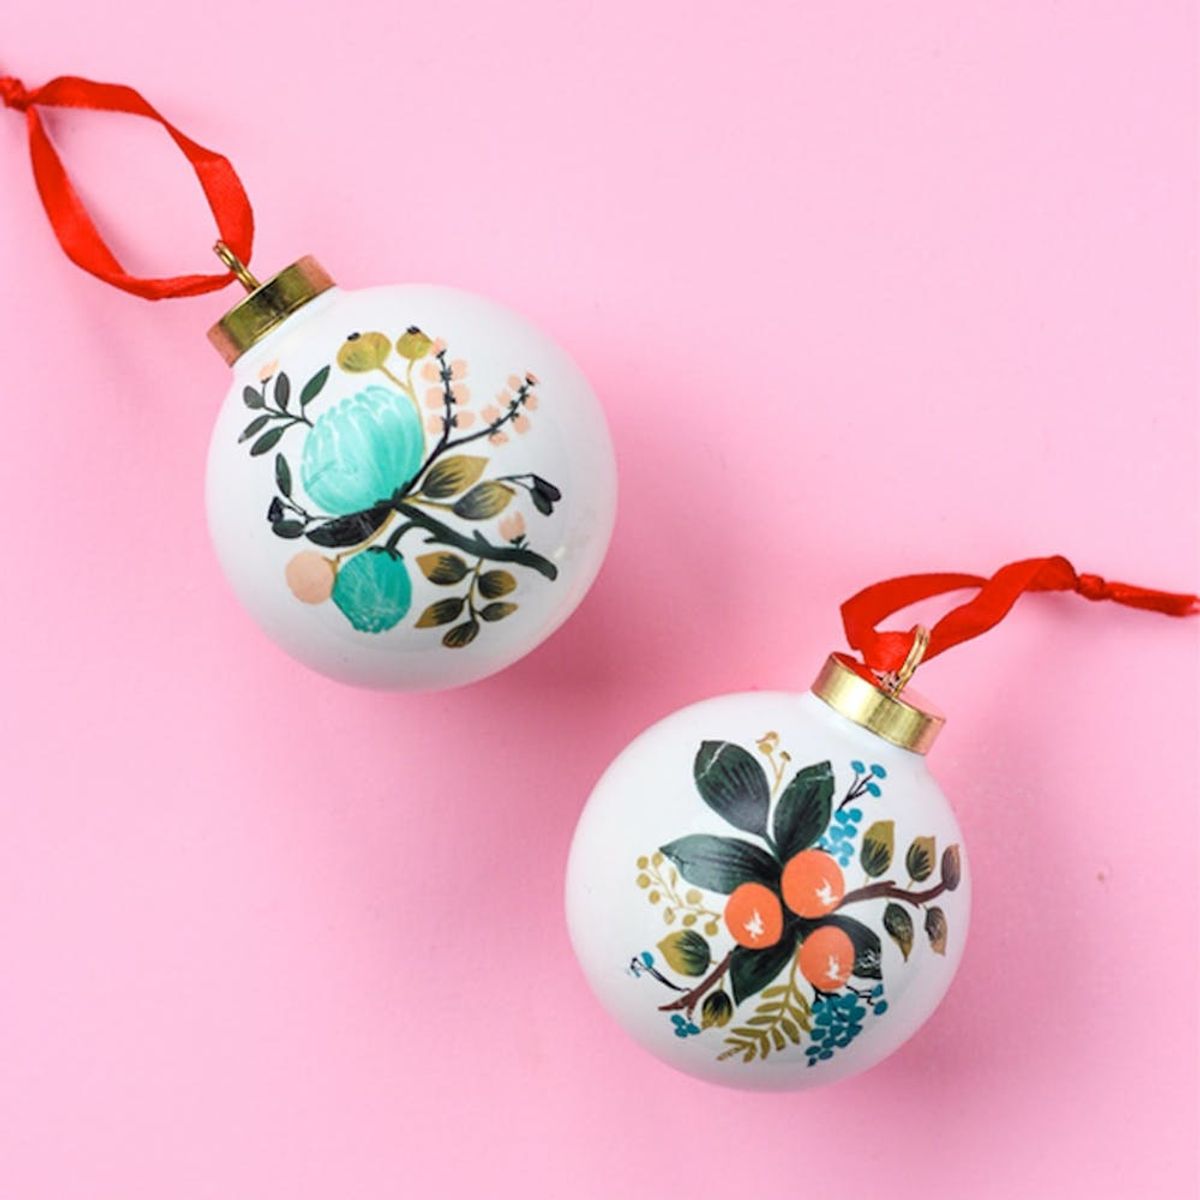 What to Make This Weekend: Marbled Cards, Painted Ornaments + More